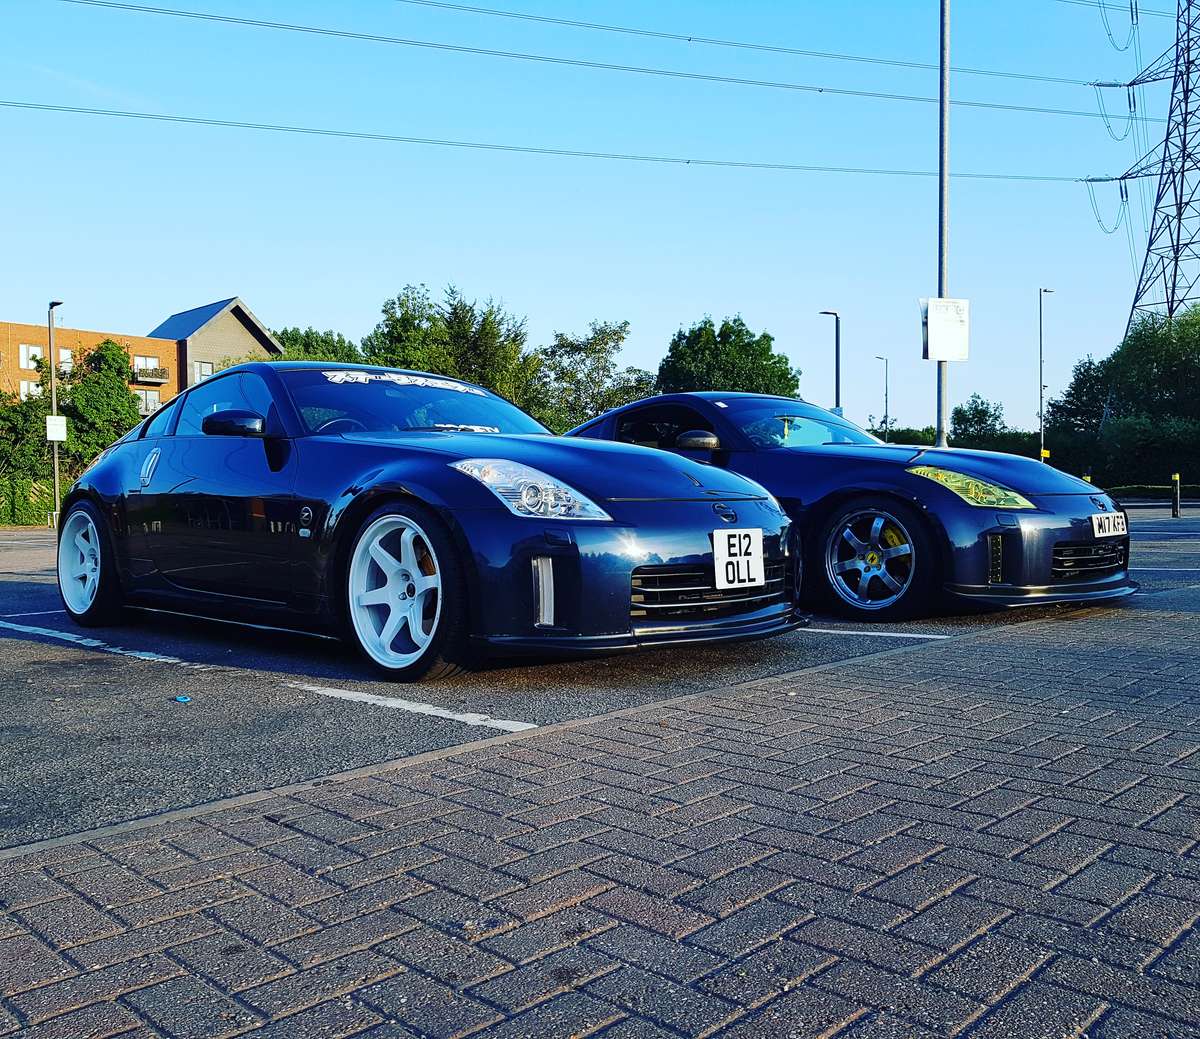 [SOLD]**SOLD** 2008 Night Blue 350Z 65K For Sale Clean Mods - Zeds For ...